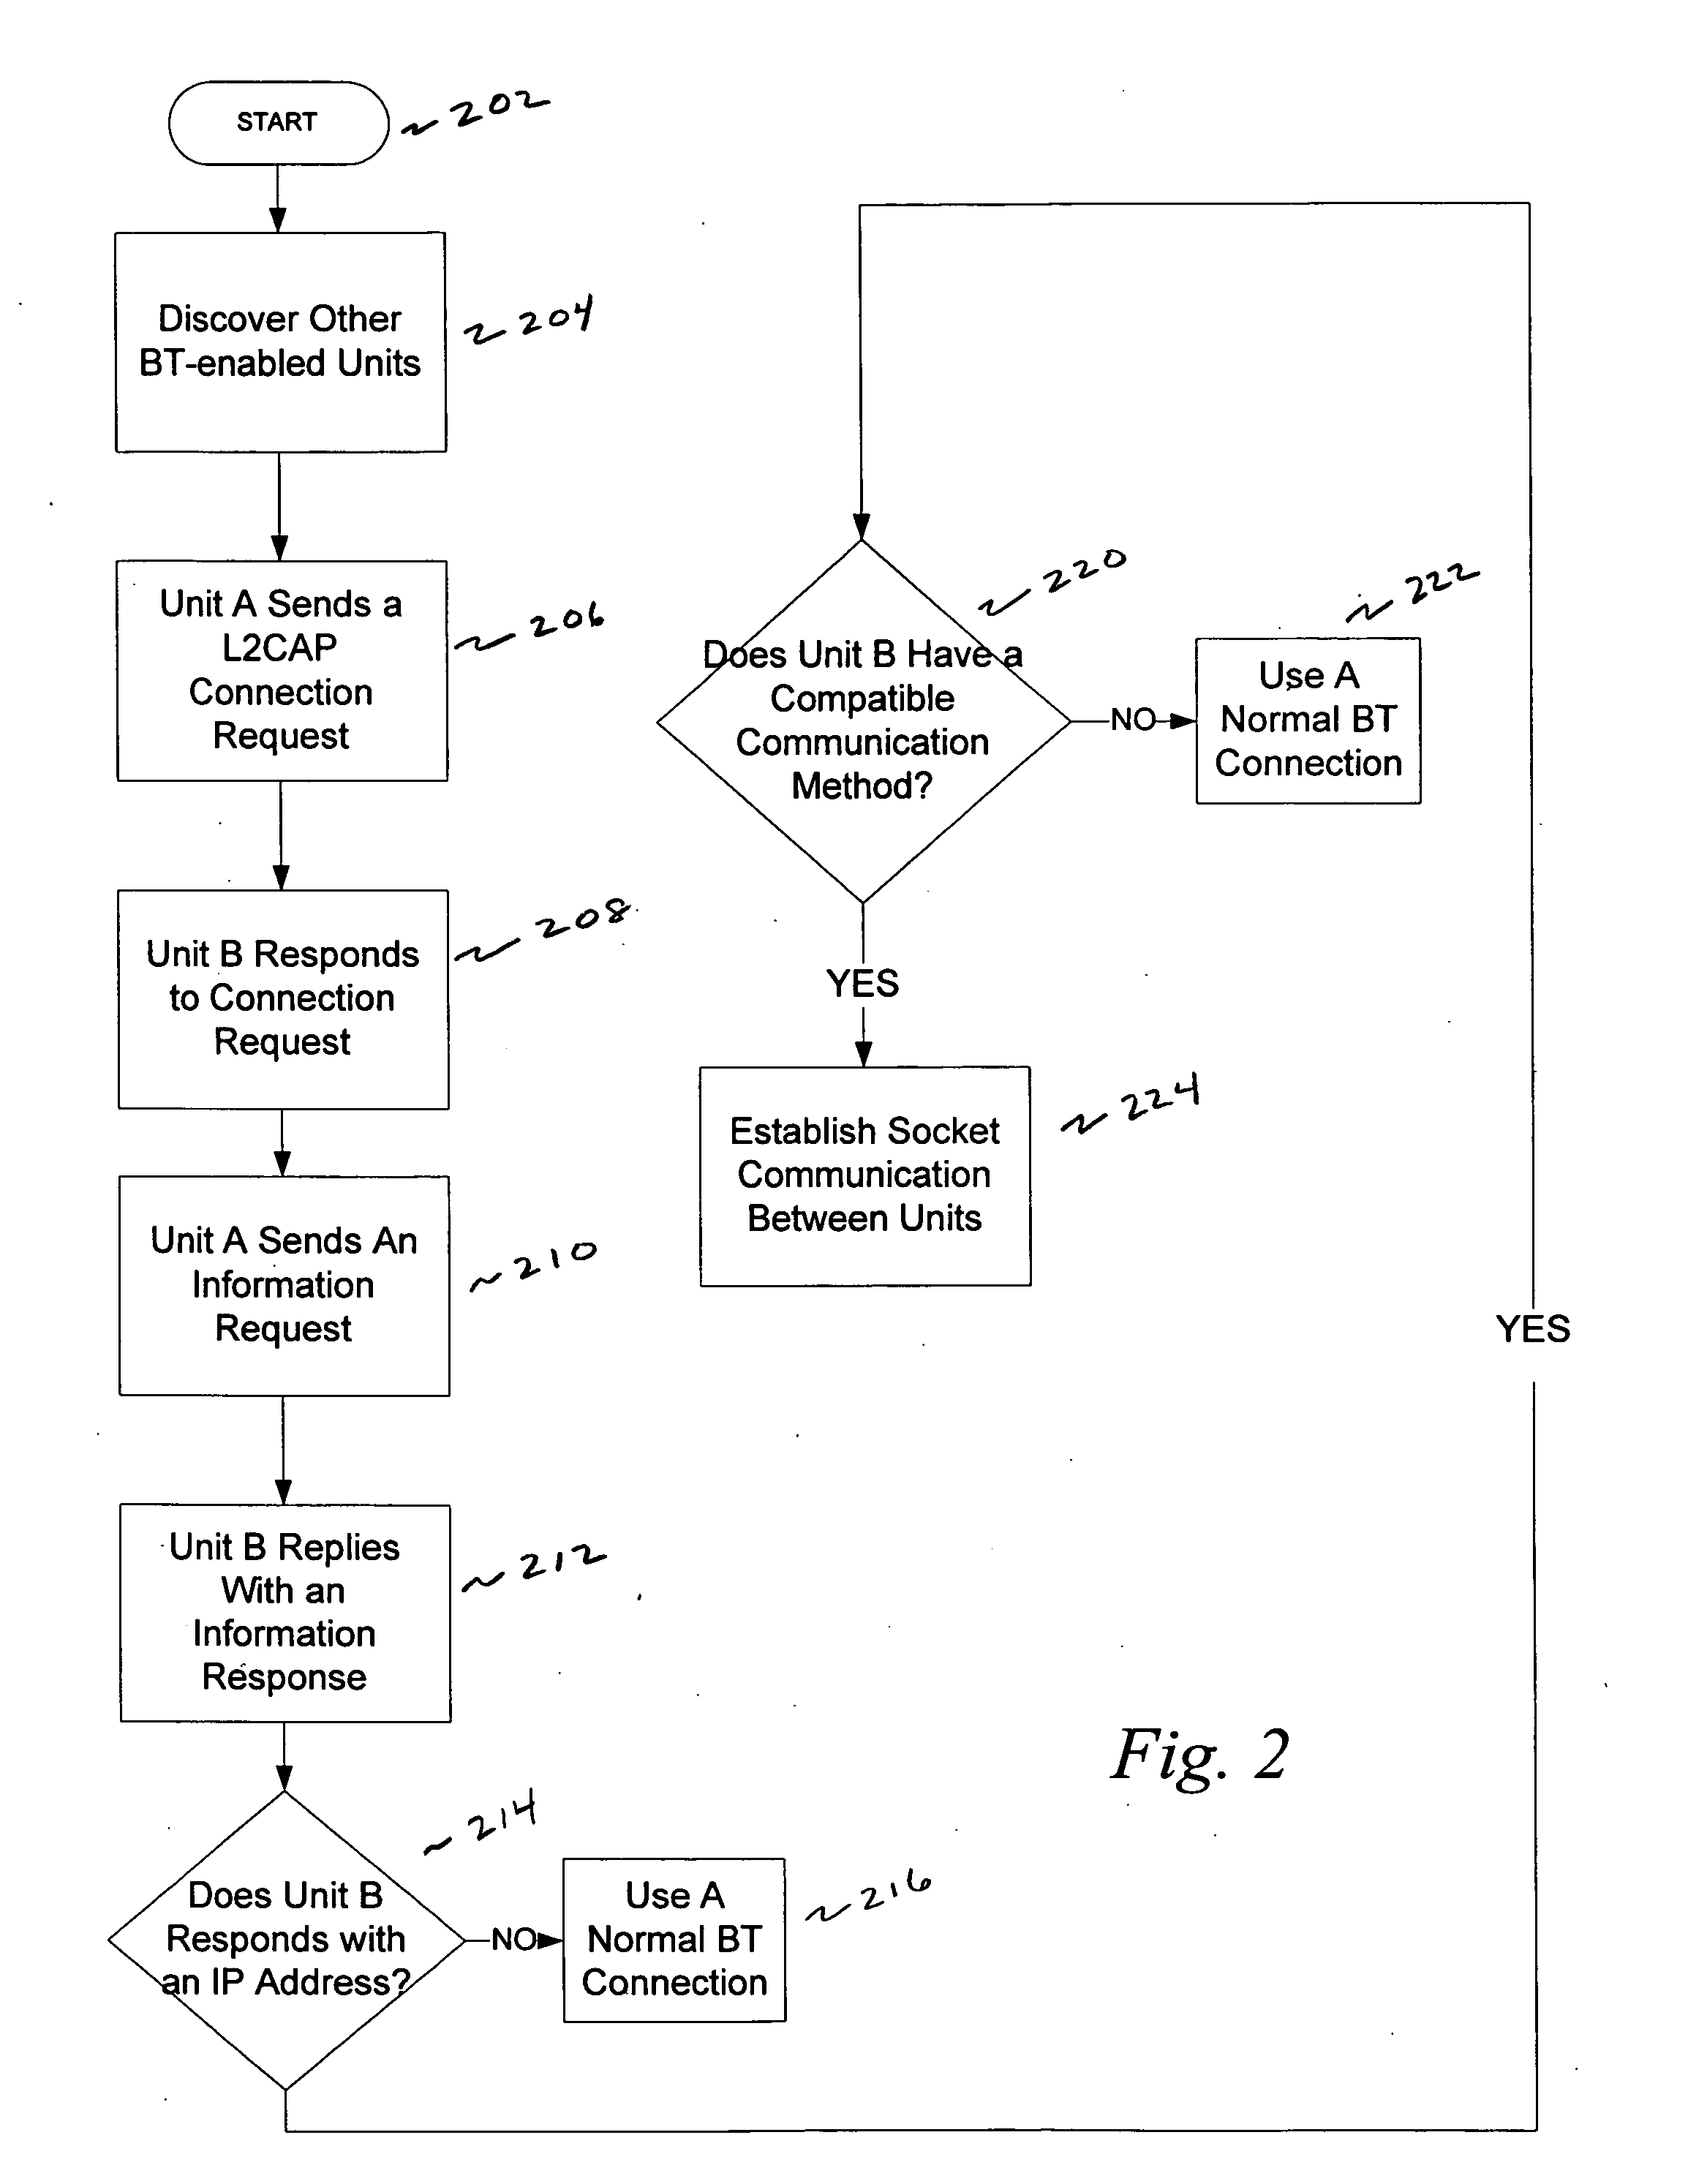 Using Bluetooth to establish ad-hoc connections between non-Bluetooth wireless communication modules